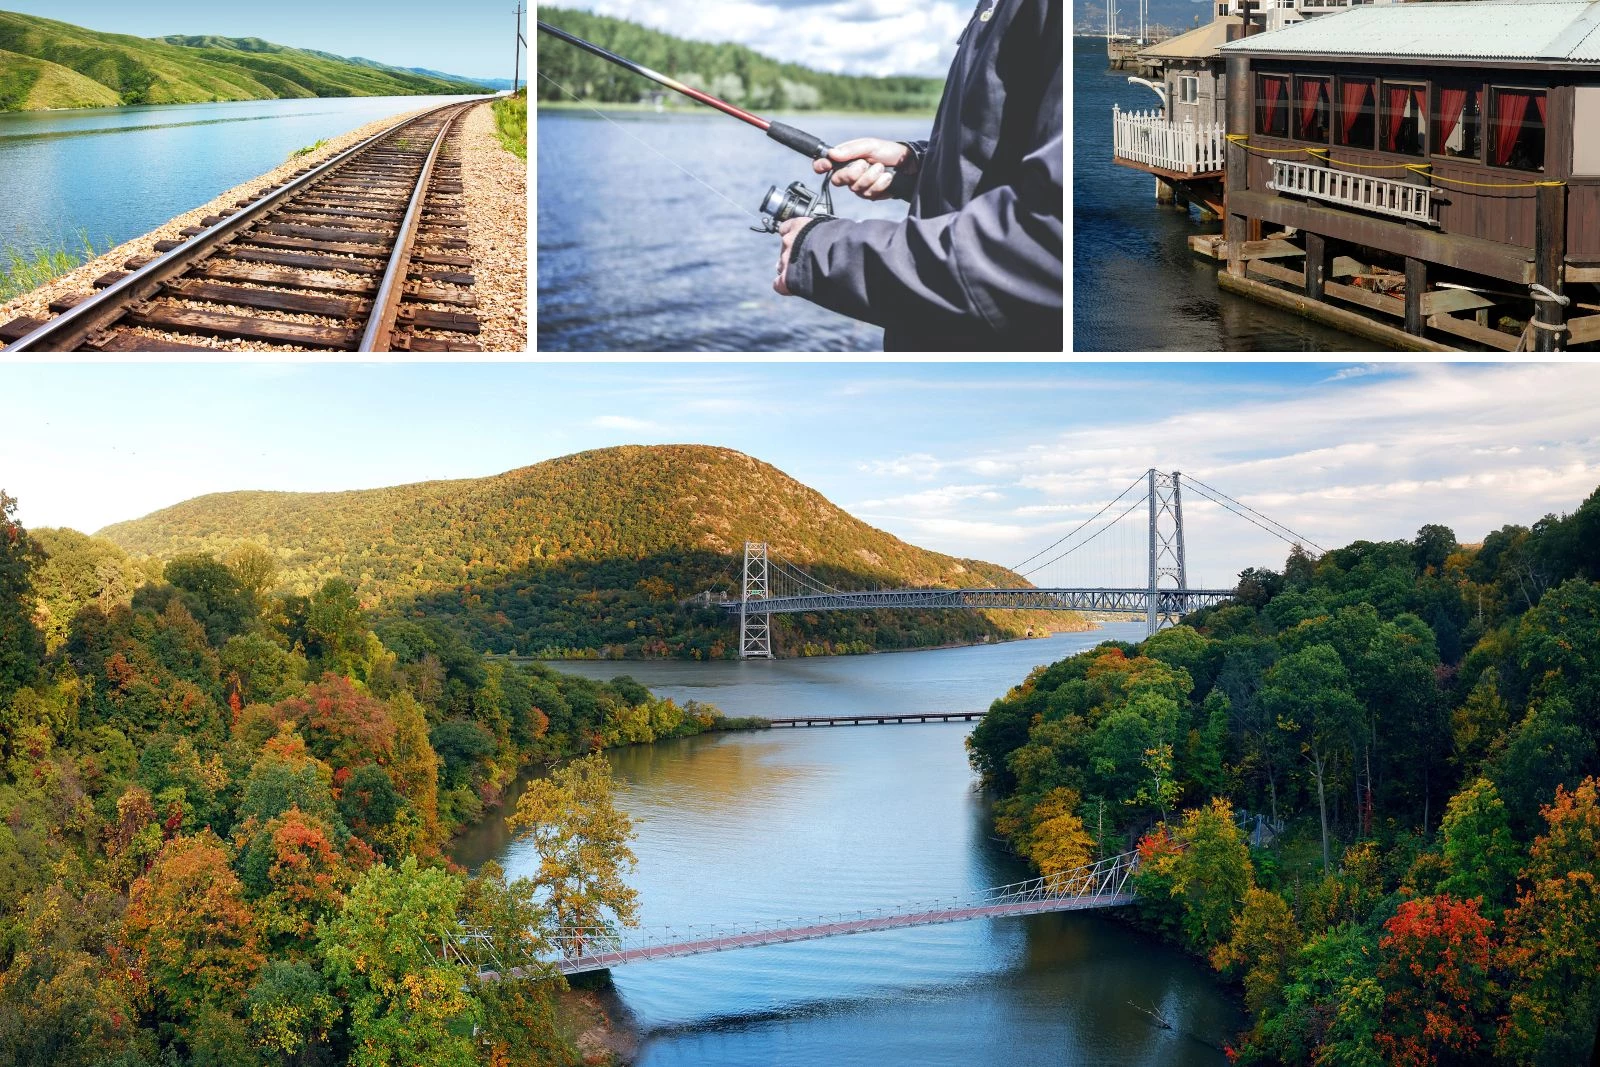 Catskill, New York - A historic Picture-Perfect River Town 